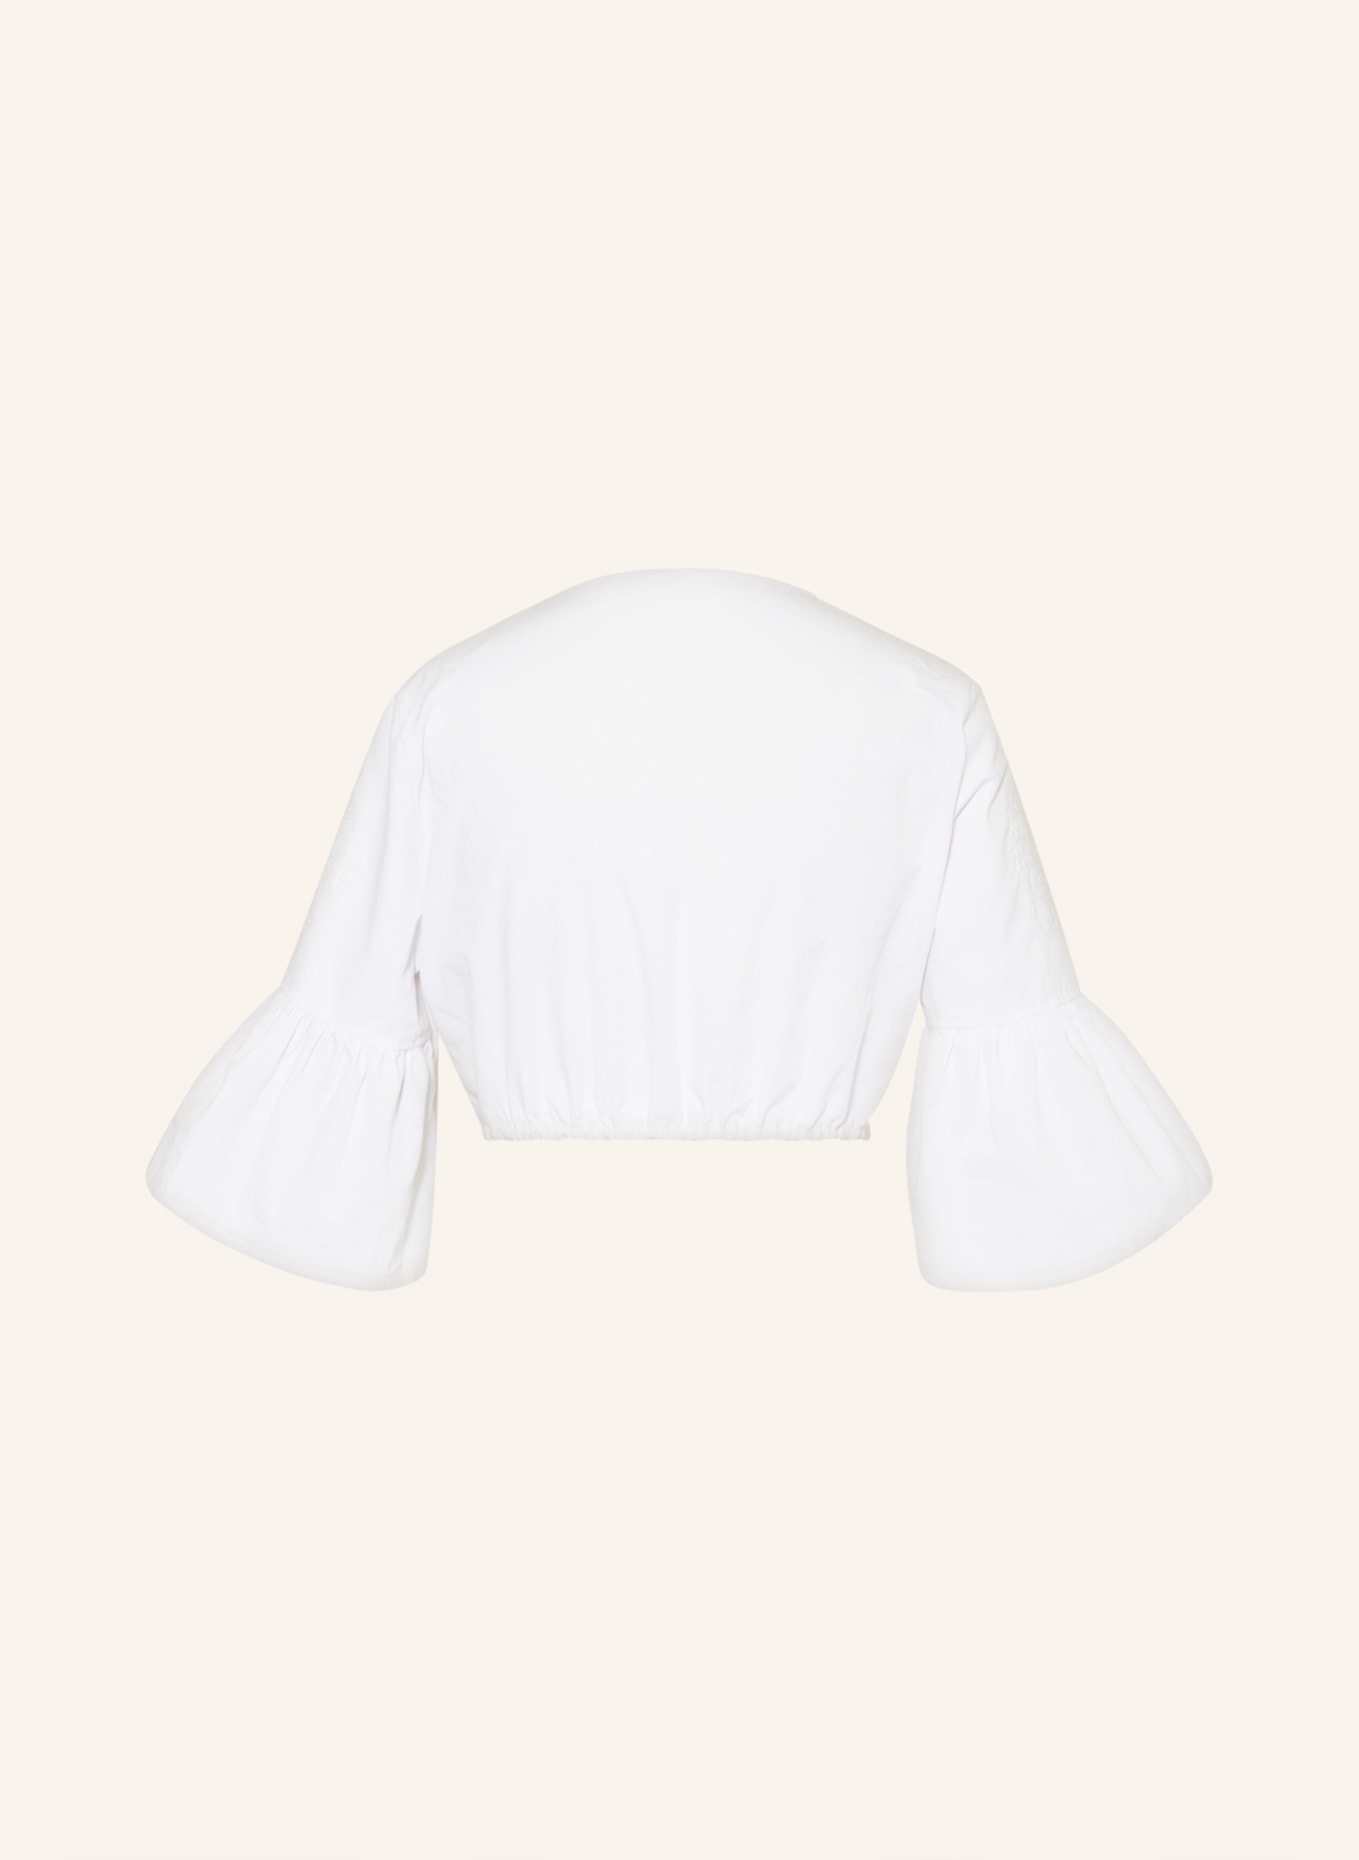 SPORTALM Dirndl blouse with embroidery, Color: WHITE (Image 2)